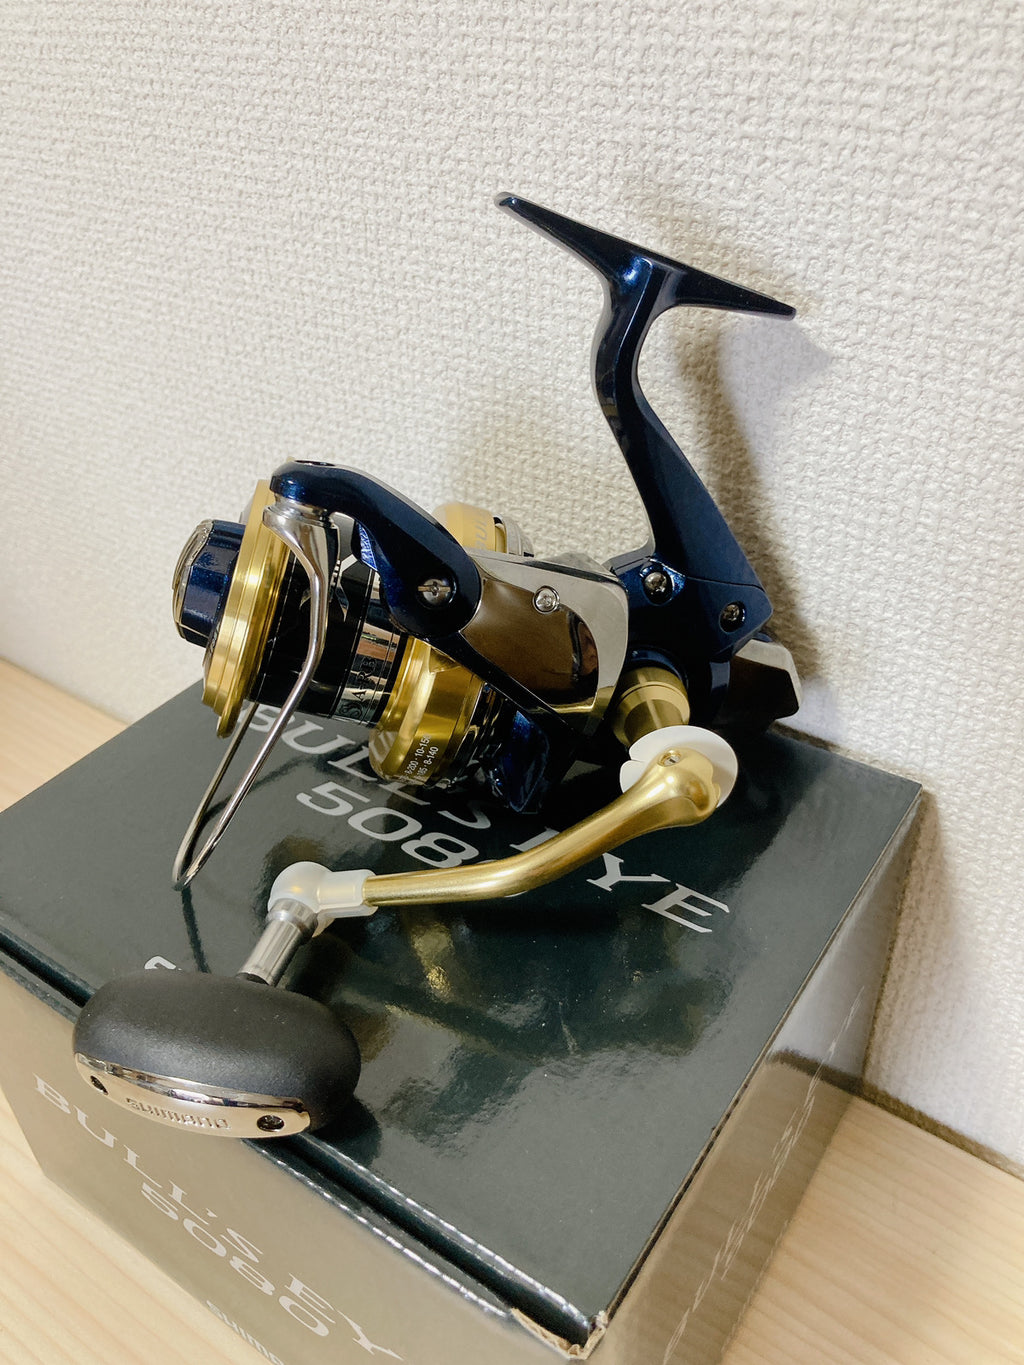 Used Shimano 14 Bulls Eye 9120 Surf Casting Spinning Reel from Japan